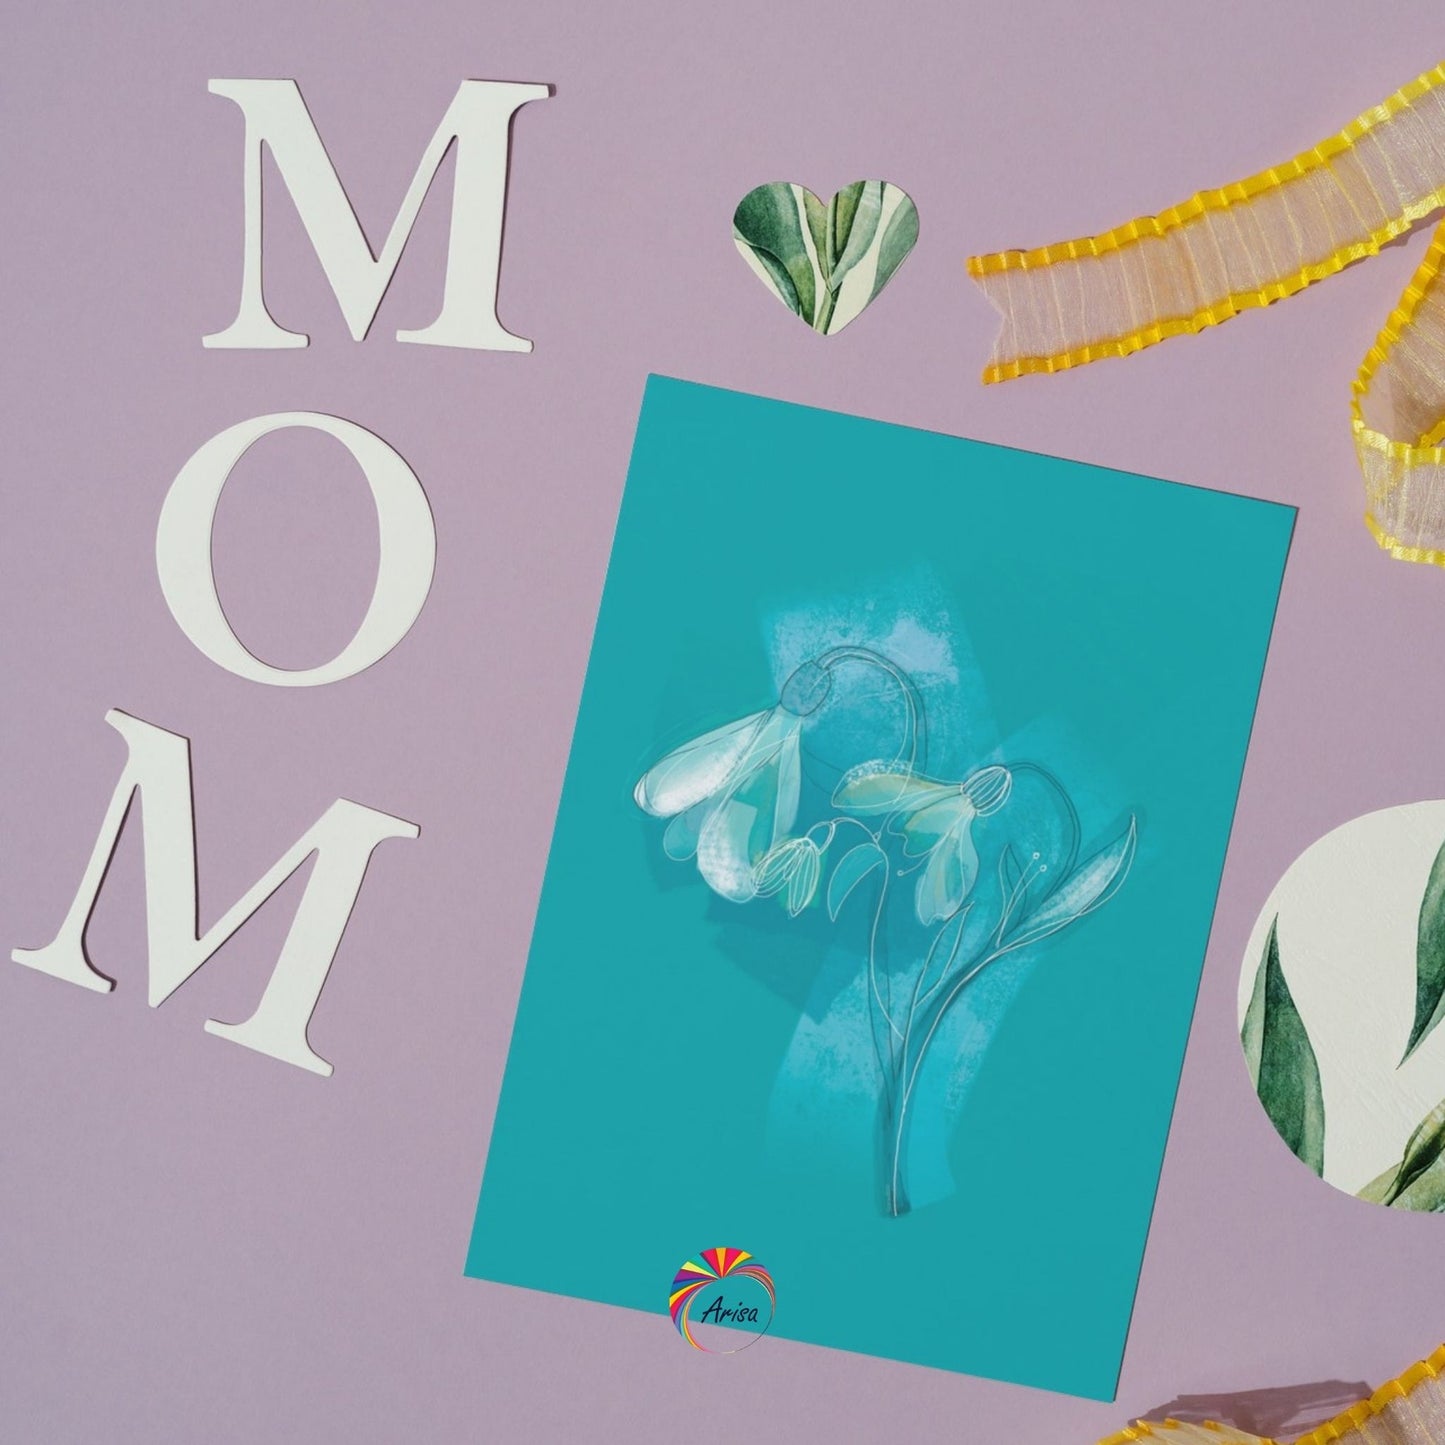 "Snowdrop" Greeting Card by ArisaTeam with the word mom close to the card ideal as a Mother's Day card.